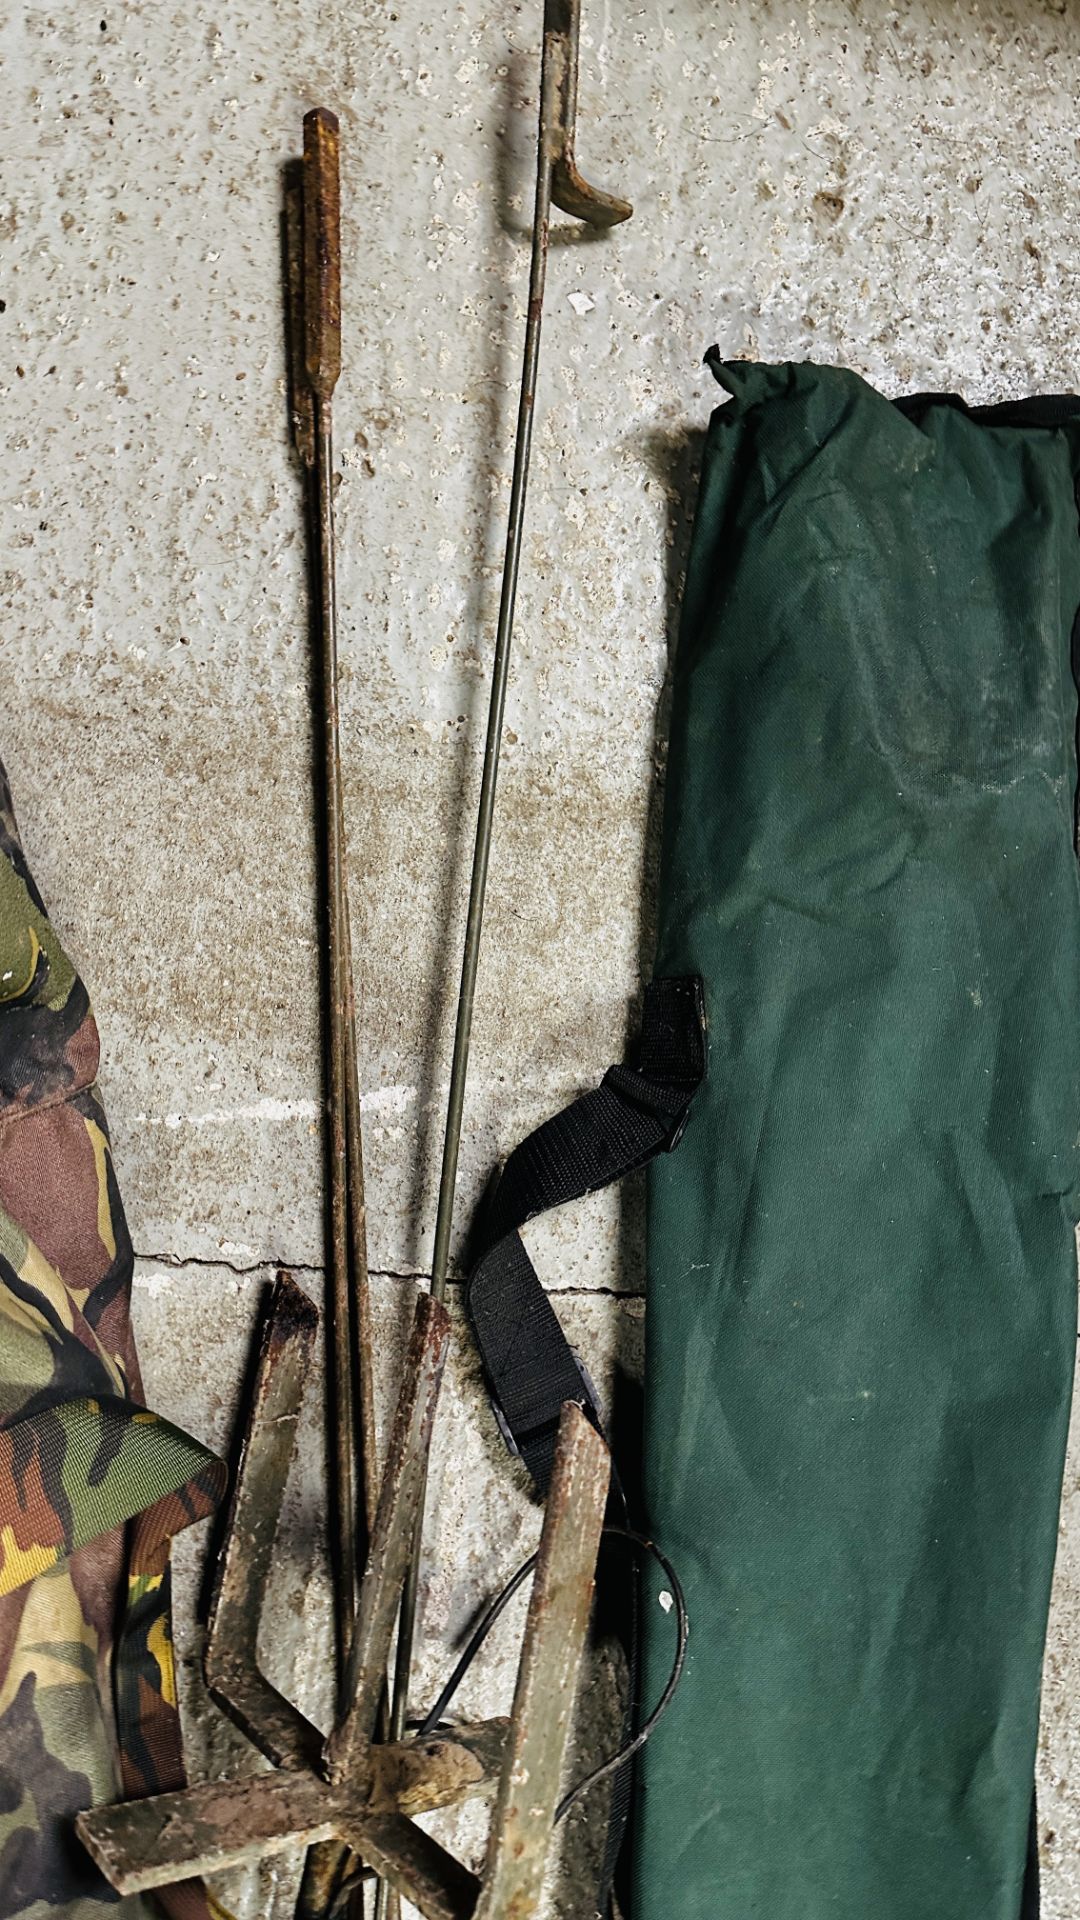 FOUR TELESCOPIC HIDE POLES, CARRY BAG WITH 19 SKEET PIGEON DECOYS , 2 FULL BODY DECOYS, - Image 11 of 12